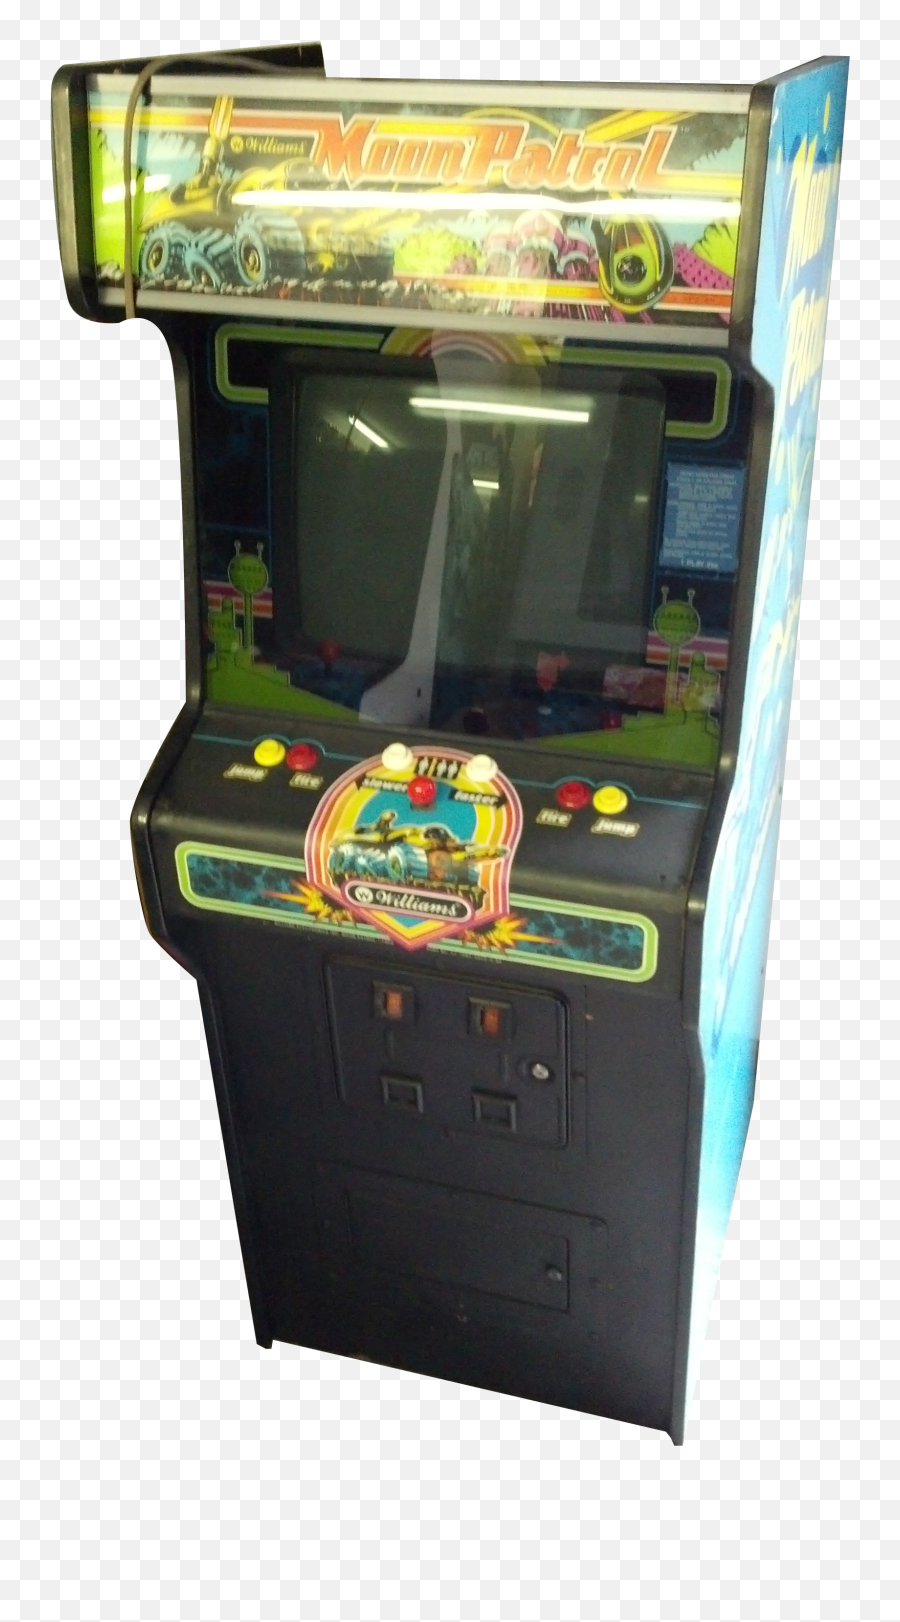 Download Hd Security - Video Game Arcade Cabinet Transparent Video Game Arcade Cabinet Png,Arcade Cabinet Png